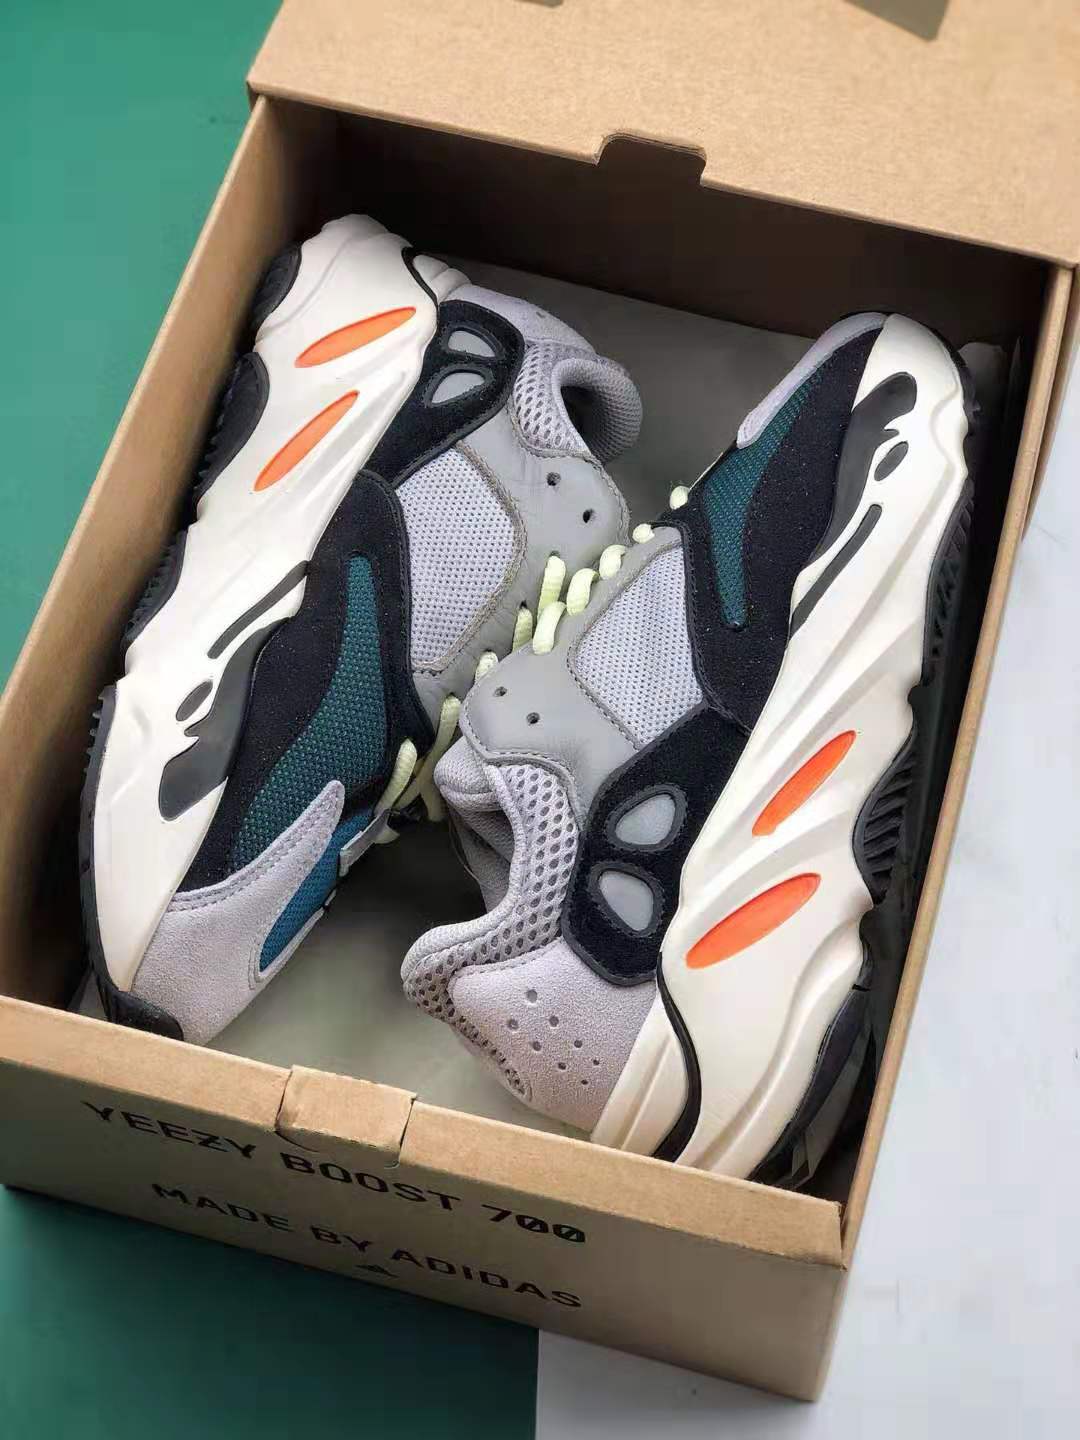 Adidas Yeezy Boost 700 'Wave Runner' B75571 - Top-Notch Sneakers for Ultimate Style and Comfort